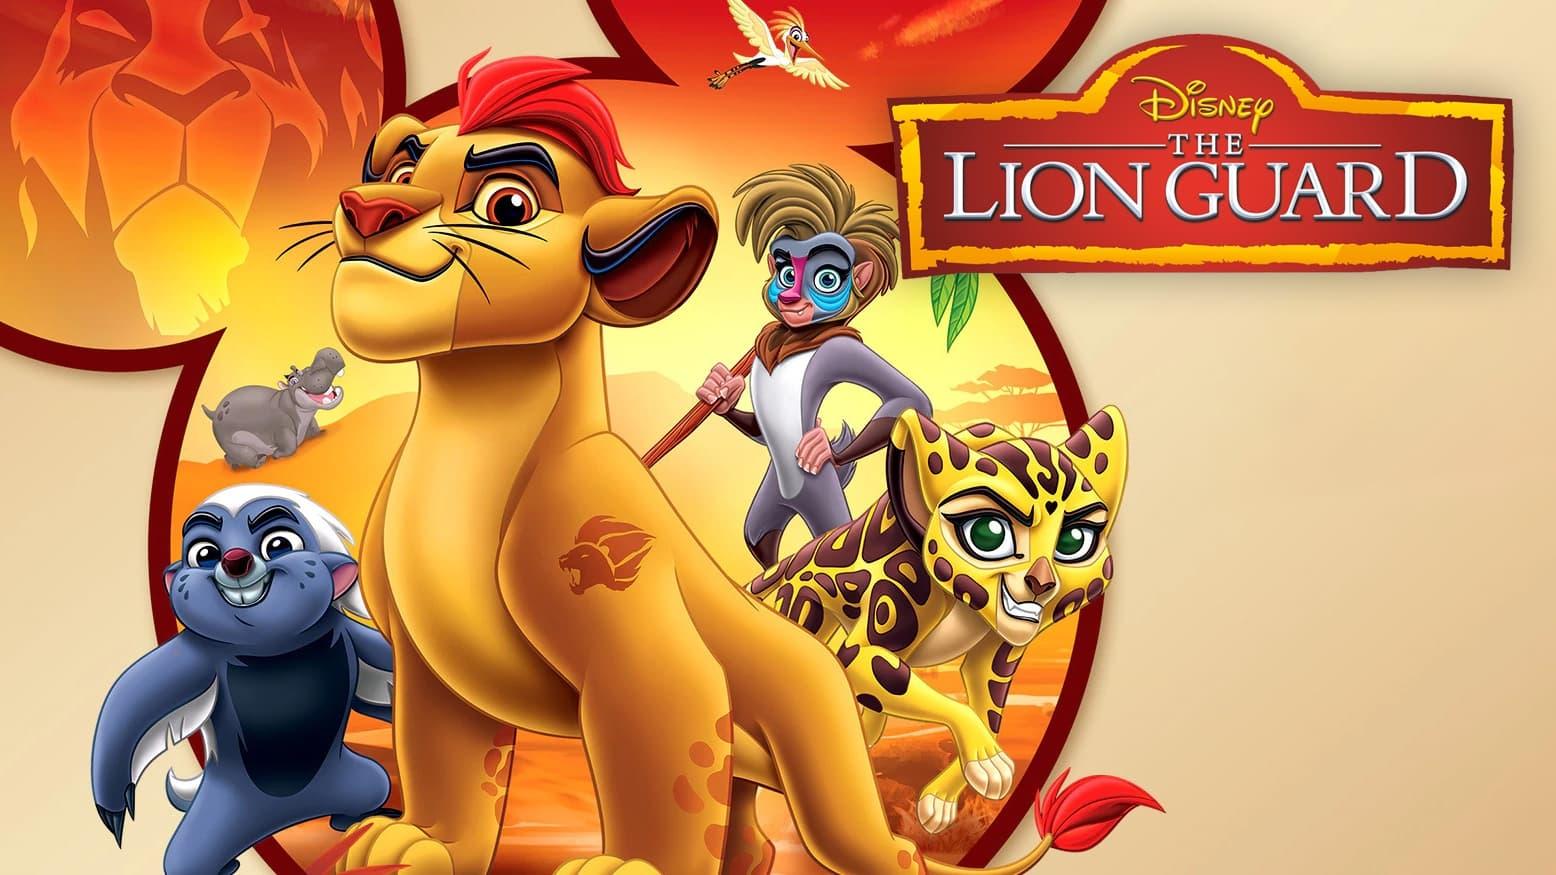 The Lion Guard: The Rise of Scar backdrop